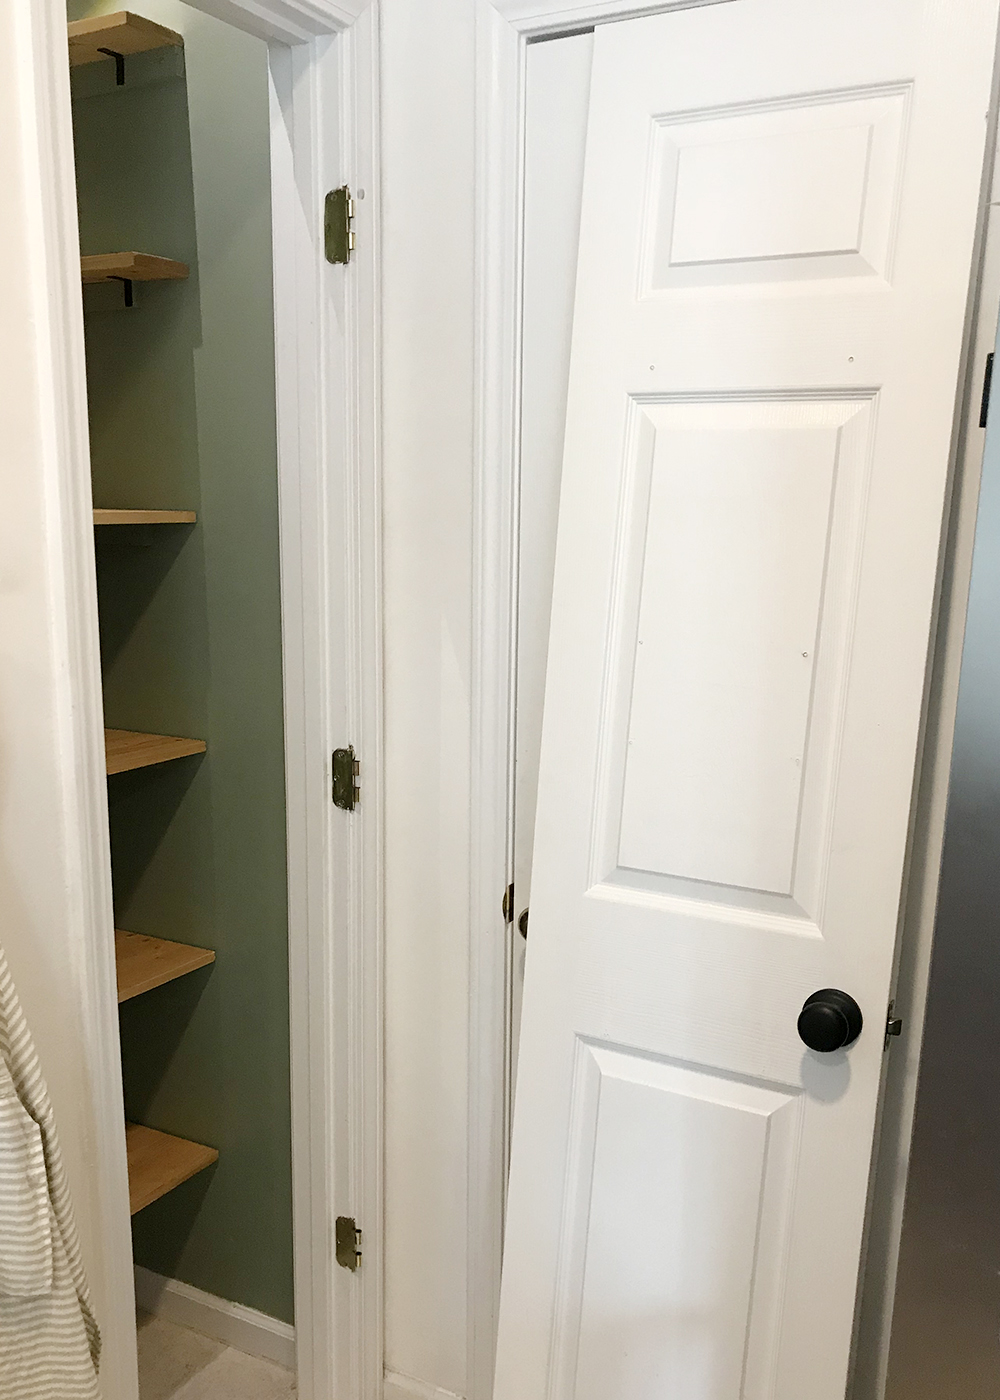 replace door hinges with oil rubbed bronze